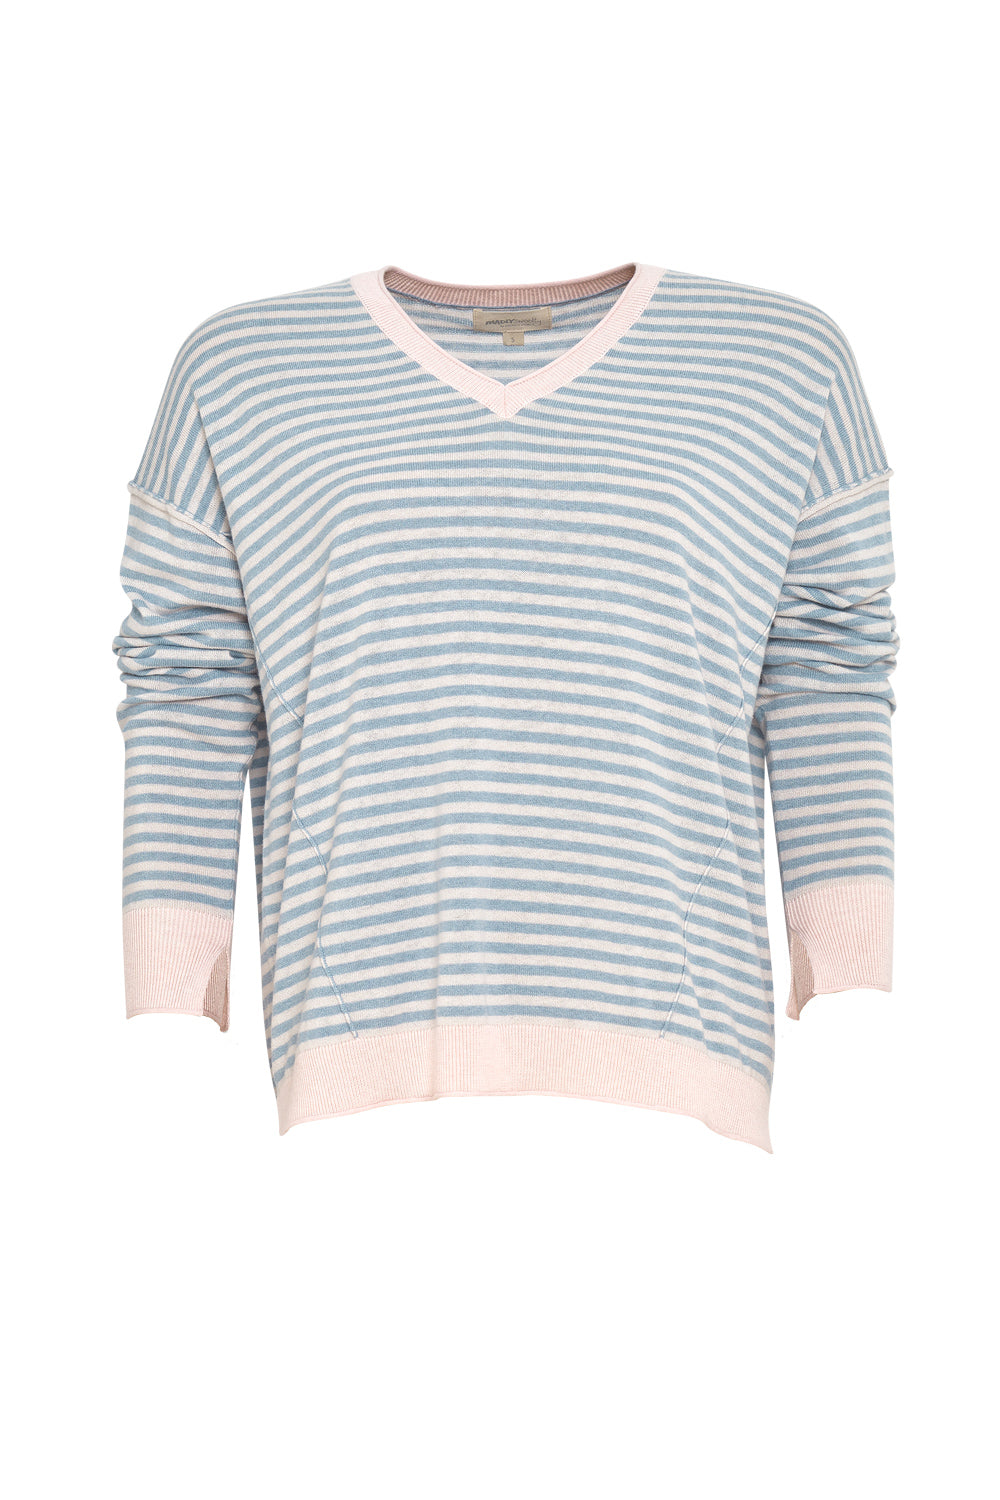 Madly Sweetly by Loobies Story Gotta Have Stripes Sweater  MSK126S